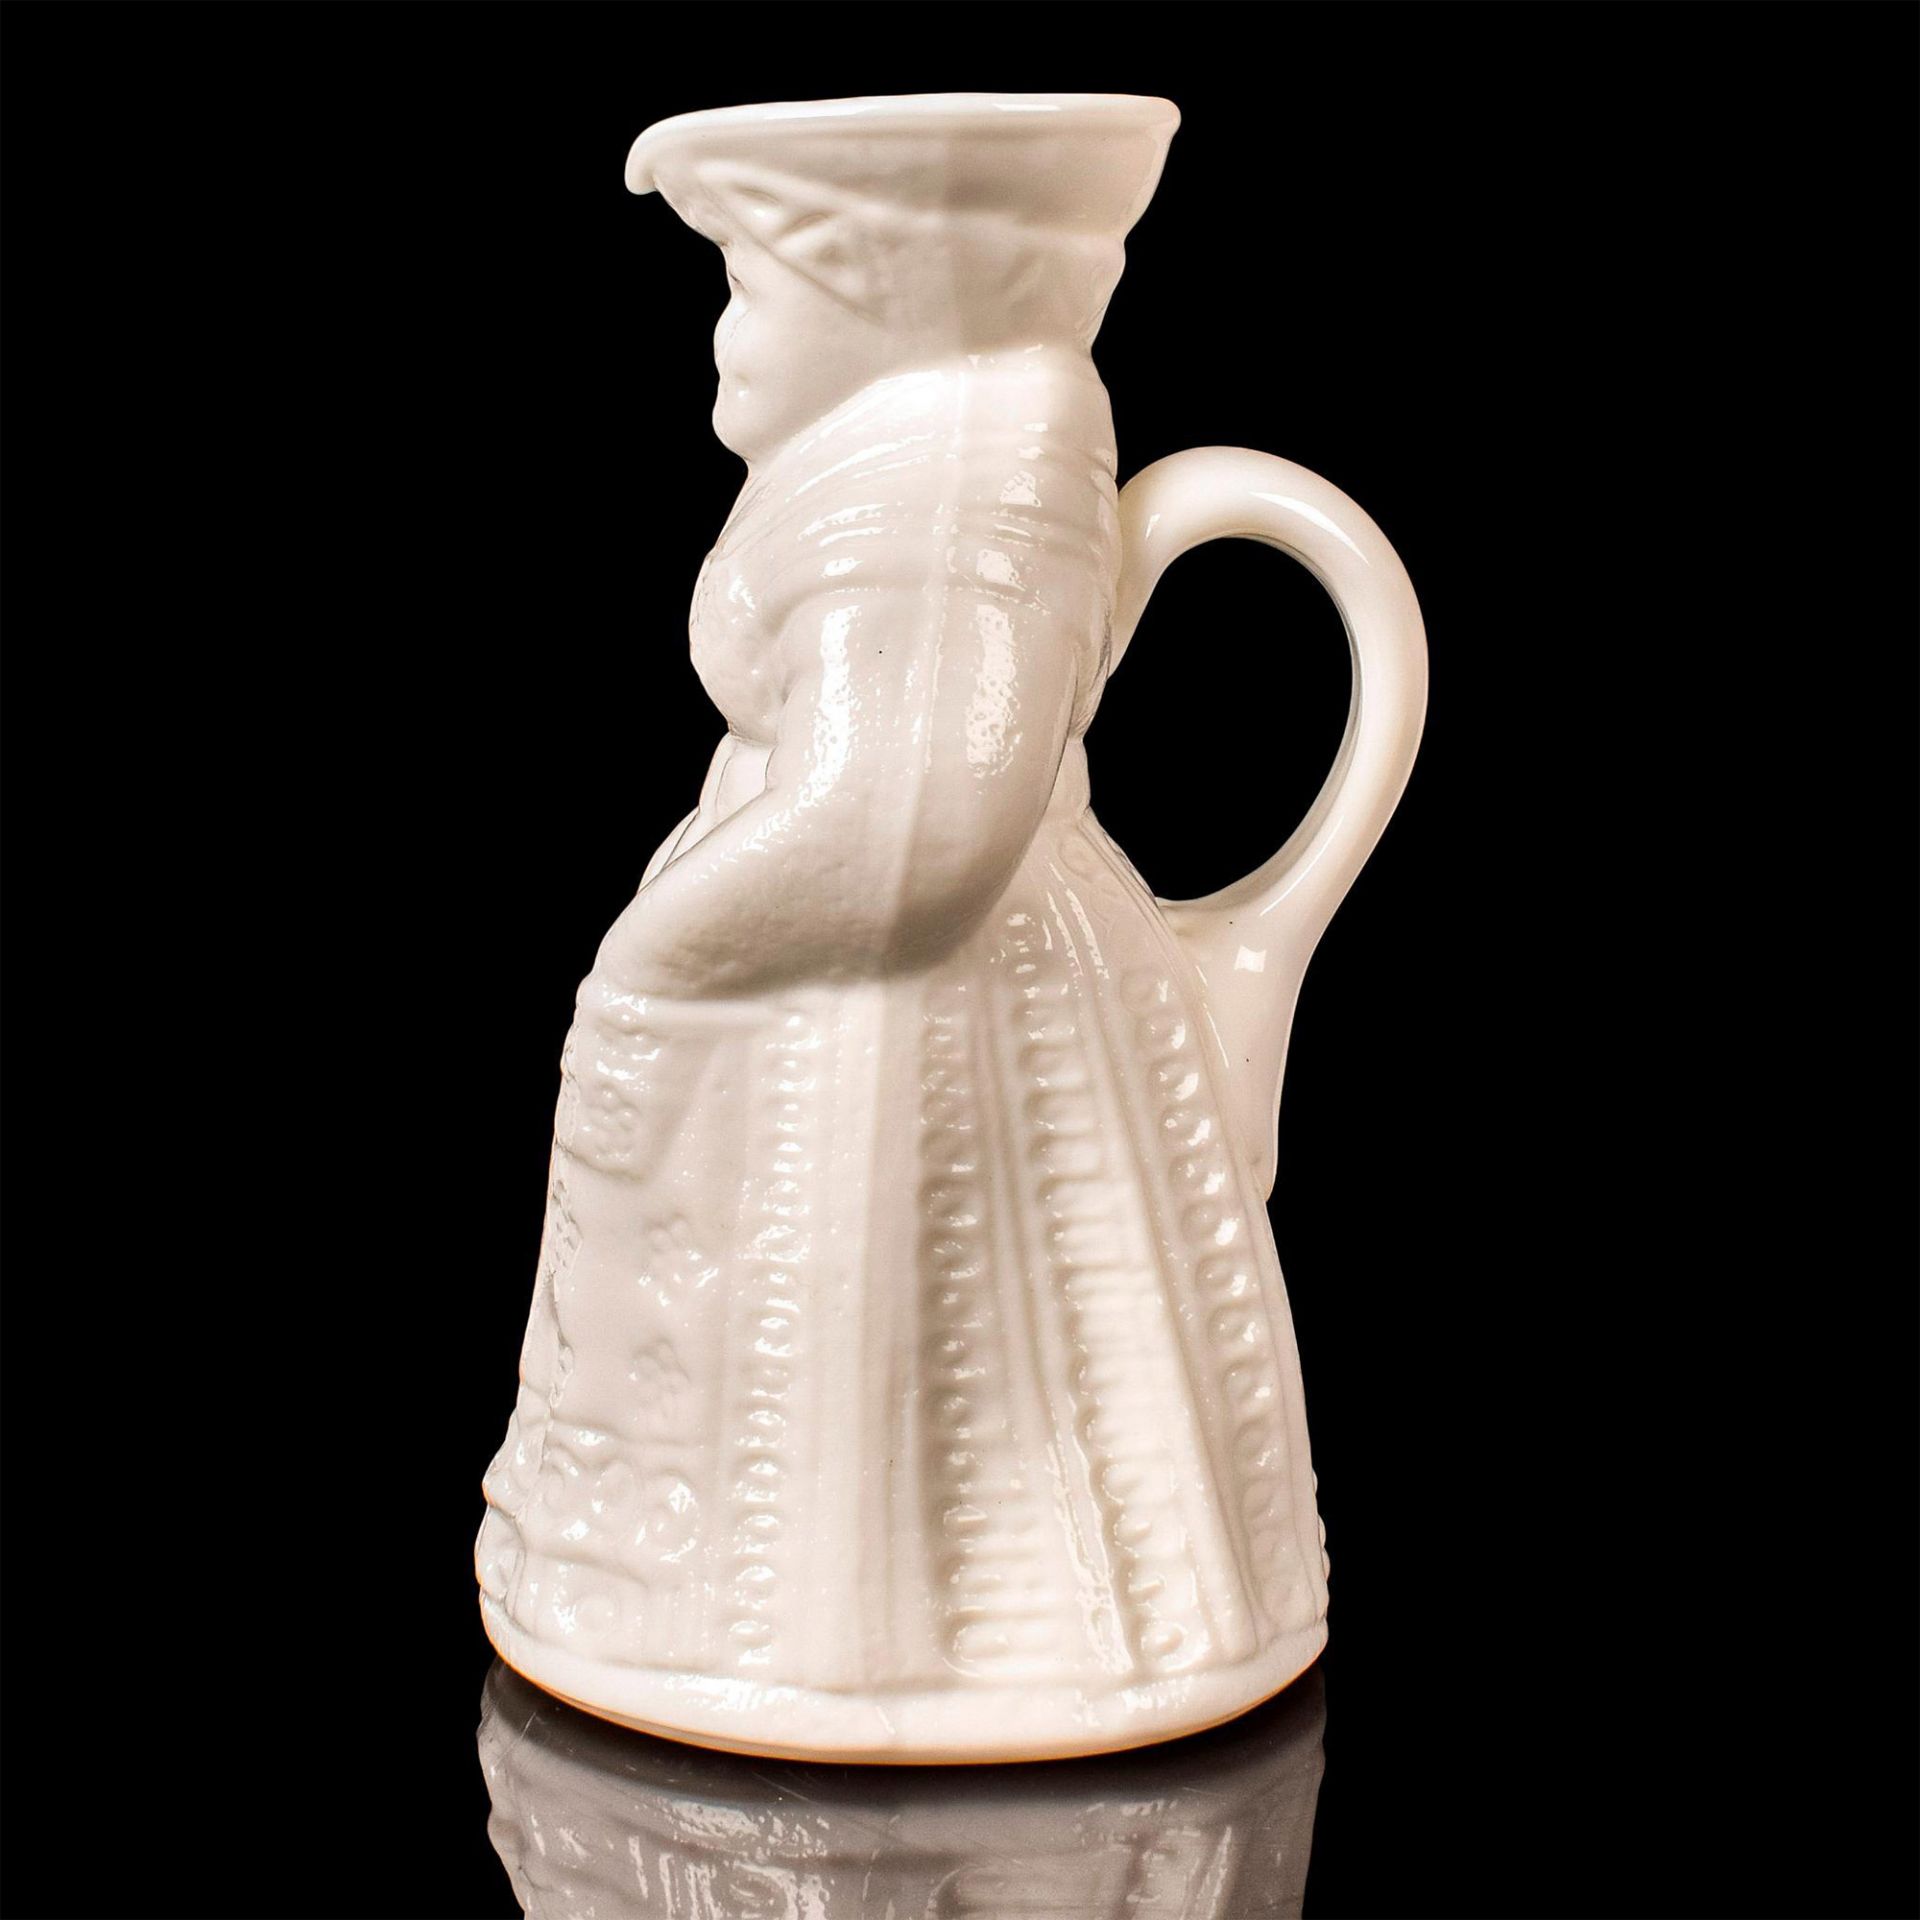 Kanawha Milk Glass Syrup Pitcher, Colonial Woman - Image 2 of 5